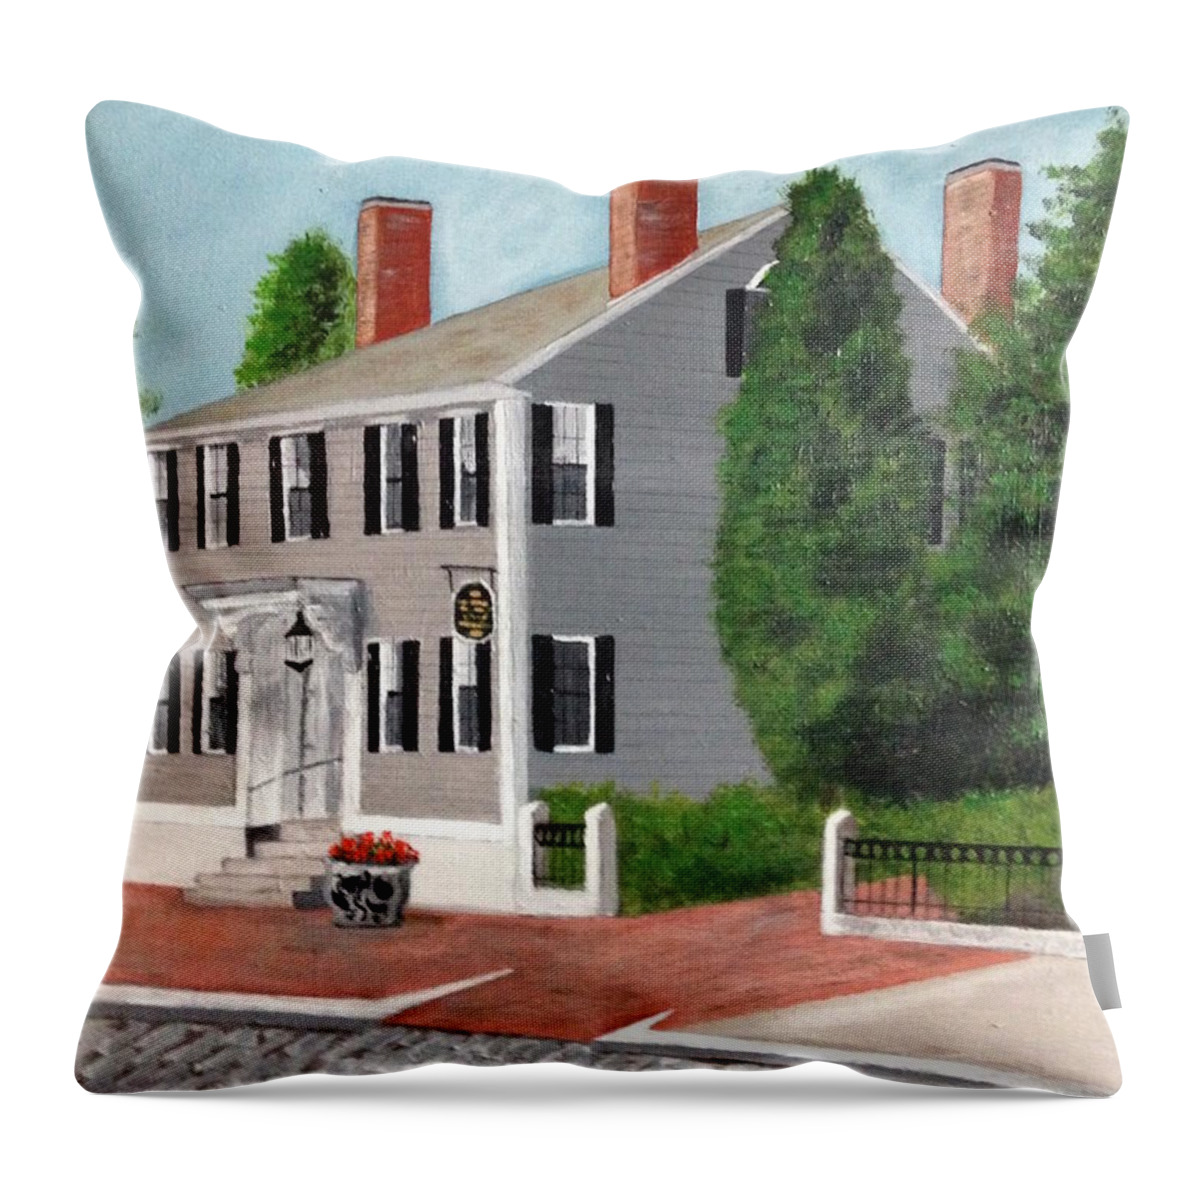 Historic Whistler House Museum Of Art Throw Pillow featuring the painting Whistler House by Cynthia Morgan